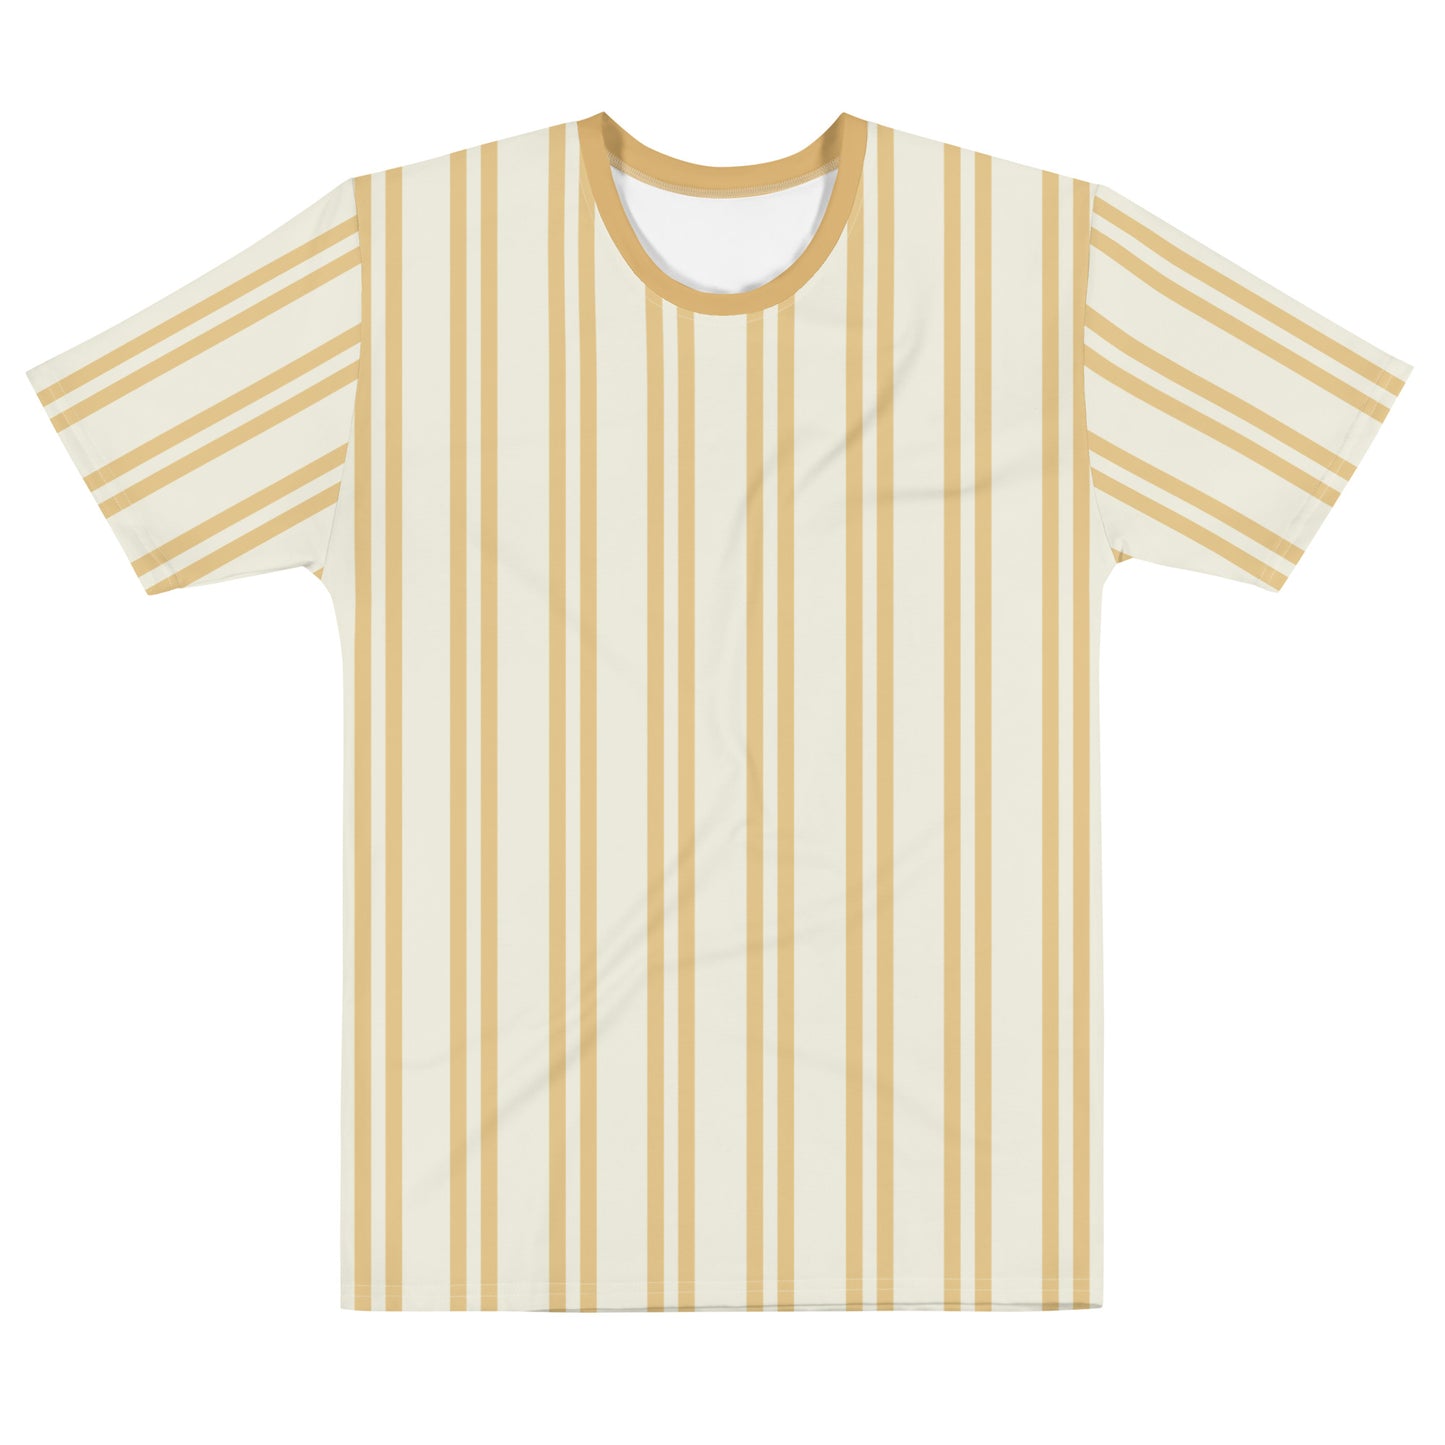 Latte - Inspired By Taylor Swift - Sustainably Made Men’s Short Sleeve Tee